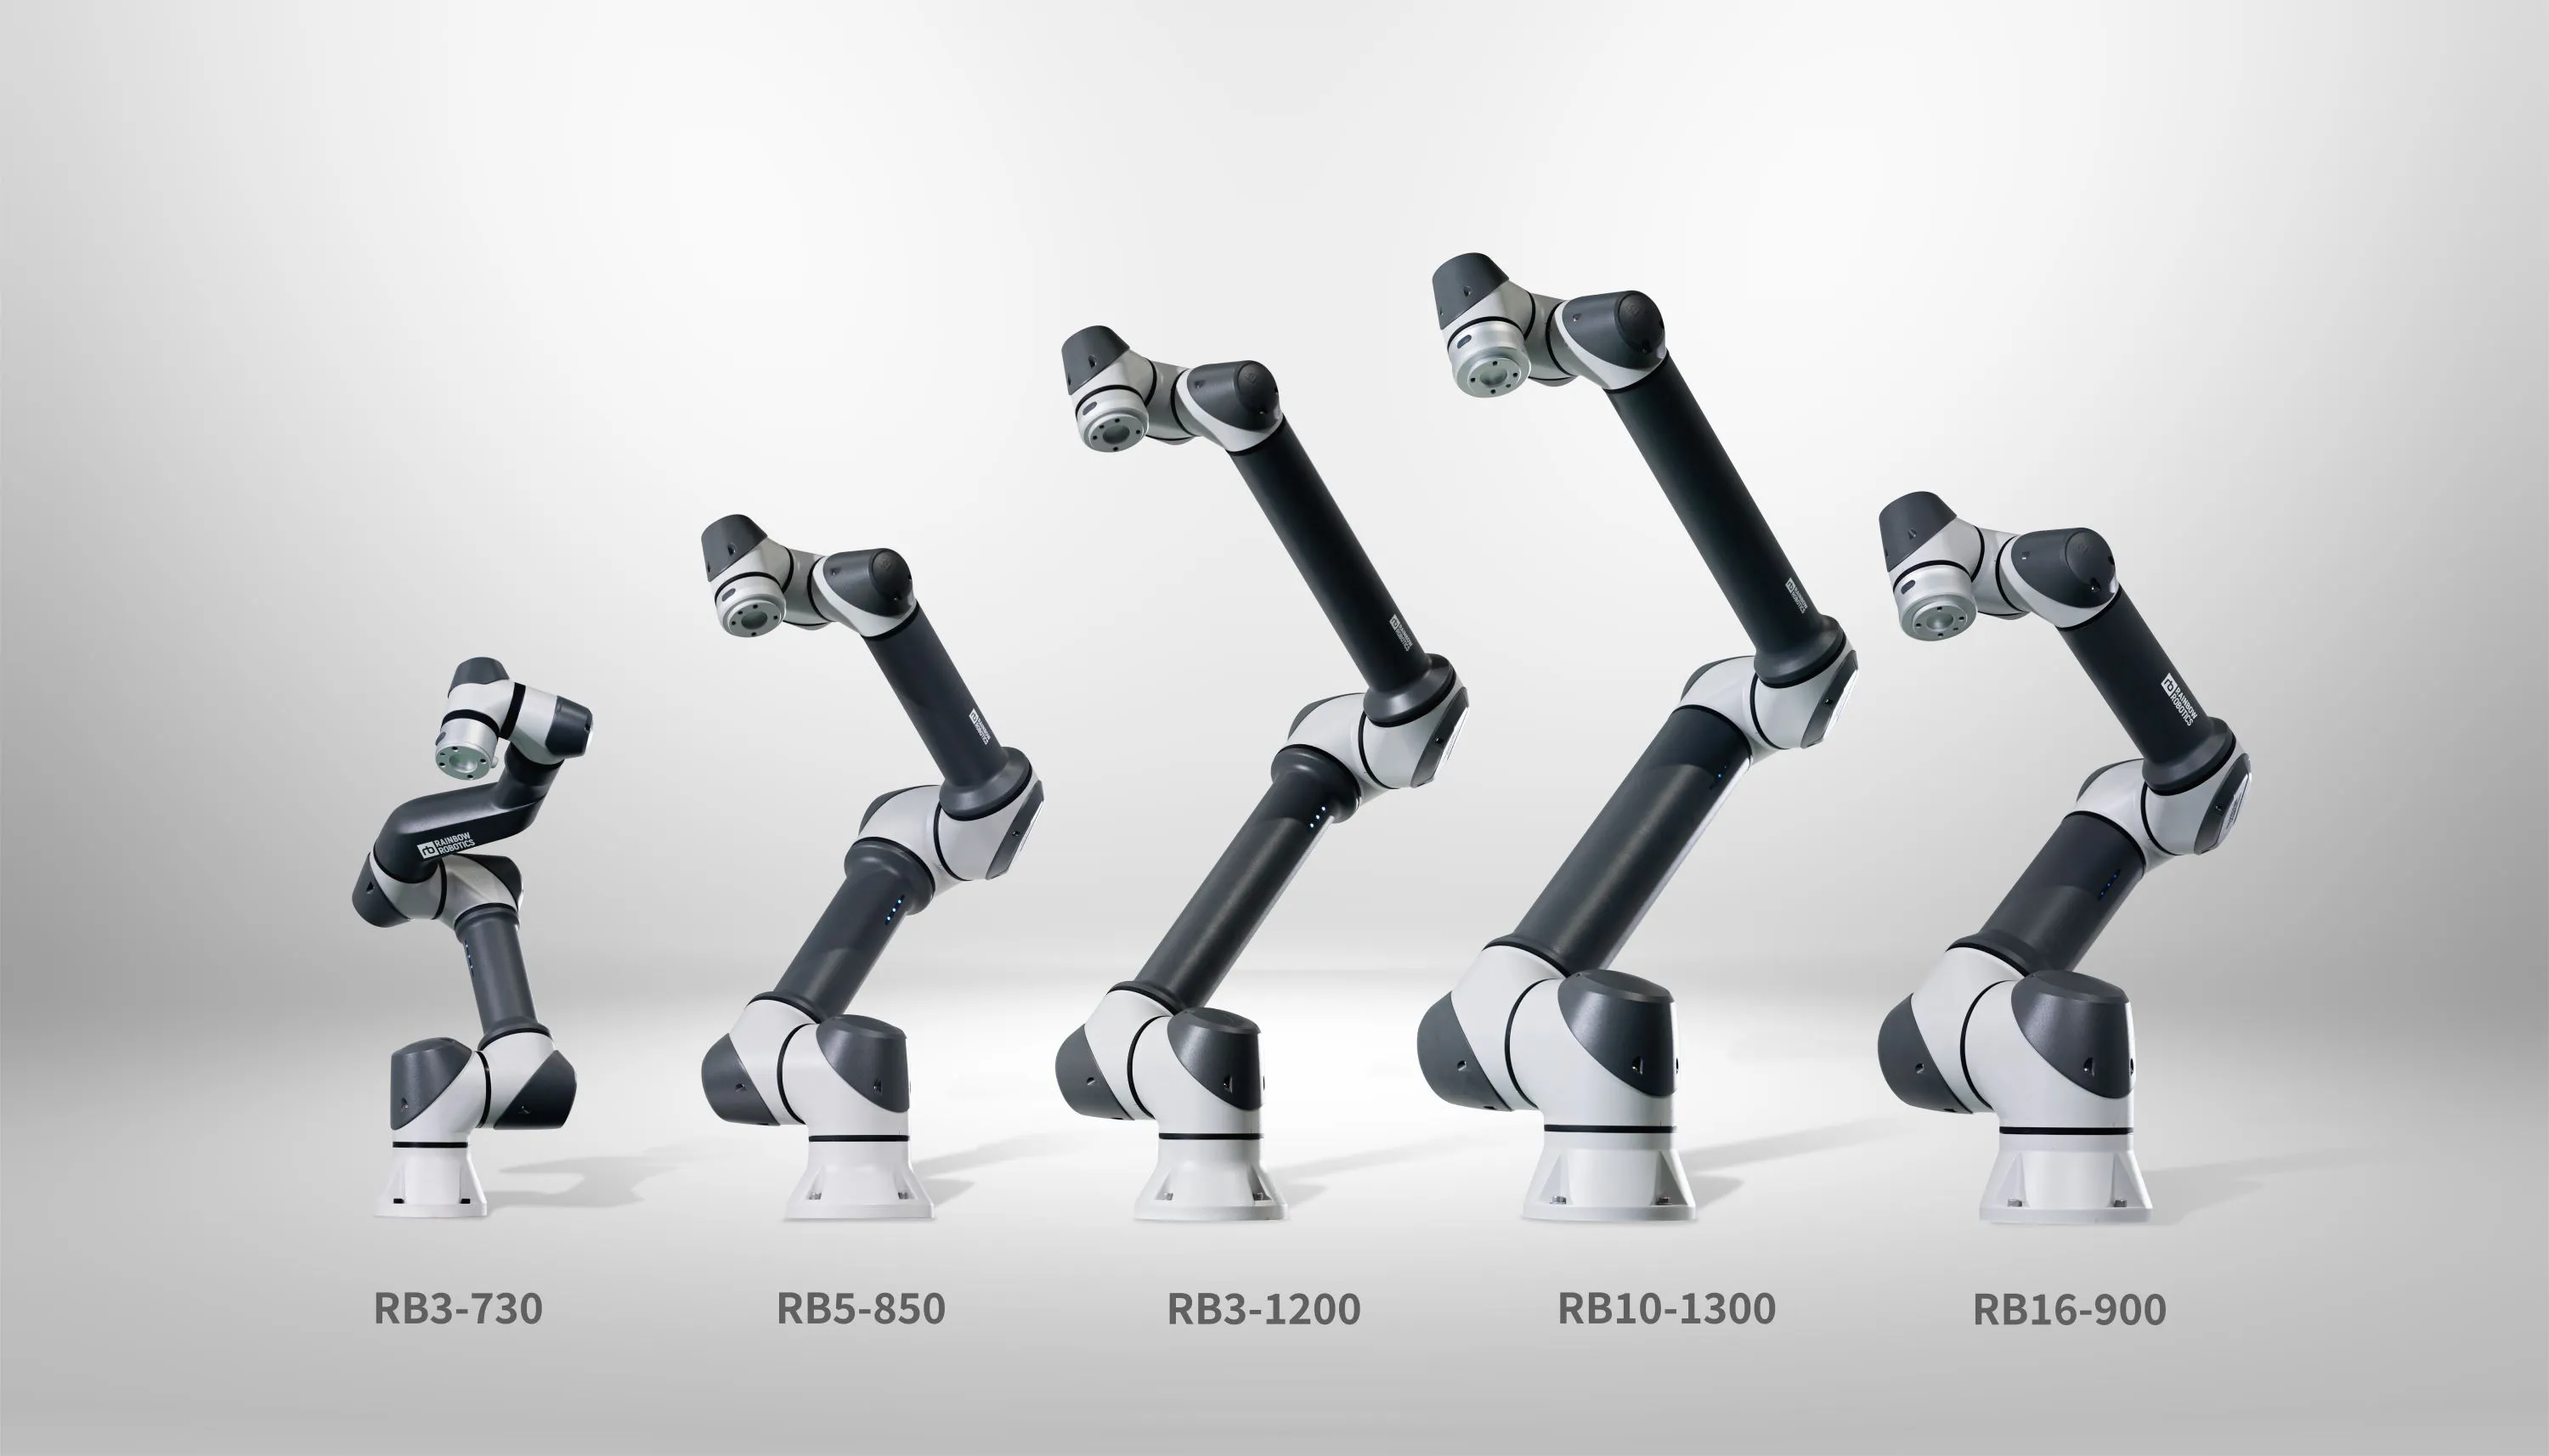 The complete RB Series from Rainbow Robotics.